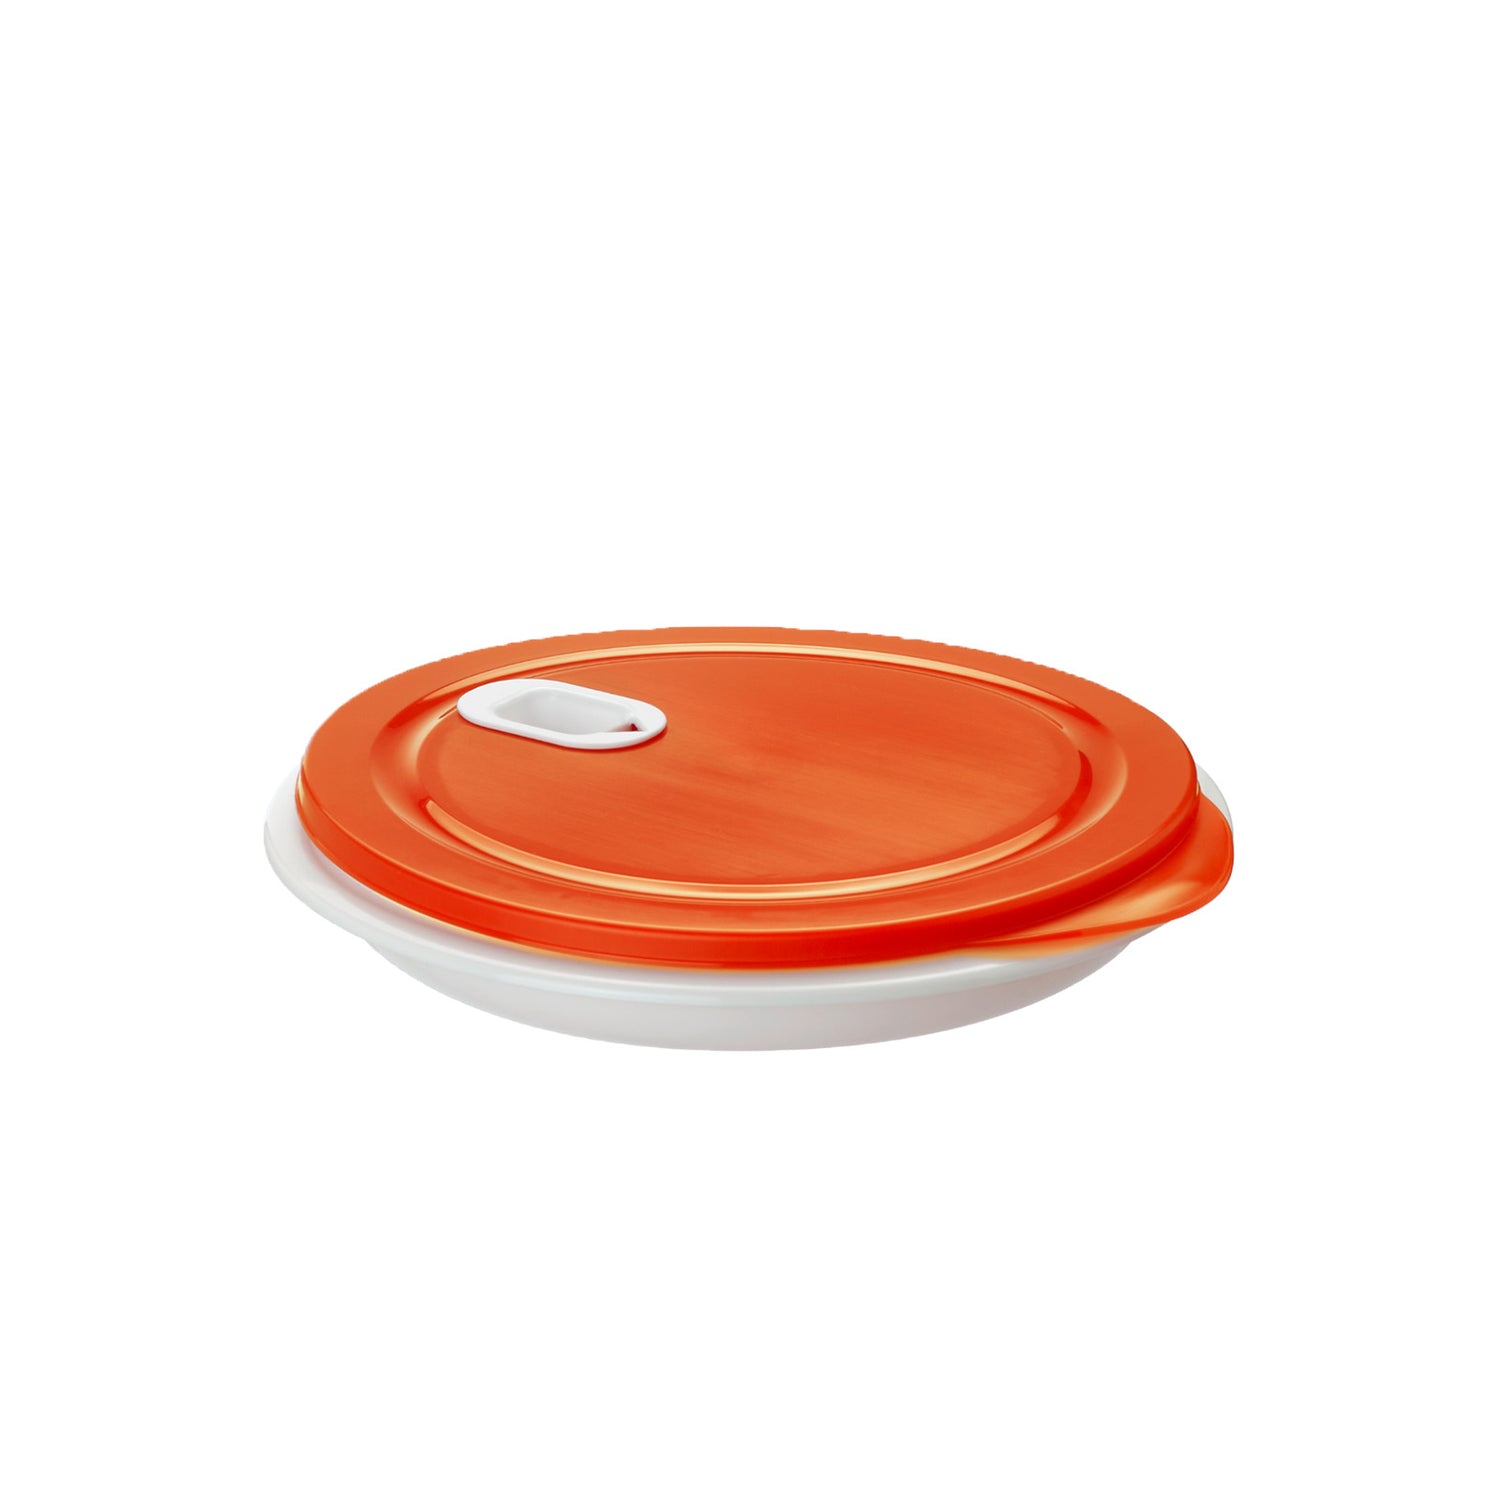 Microwave plate 1.2 l, XL CLEVER